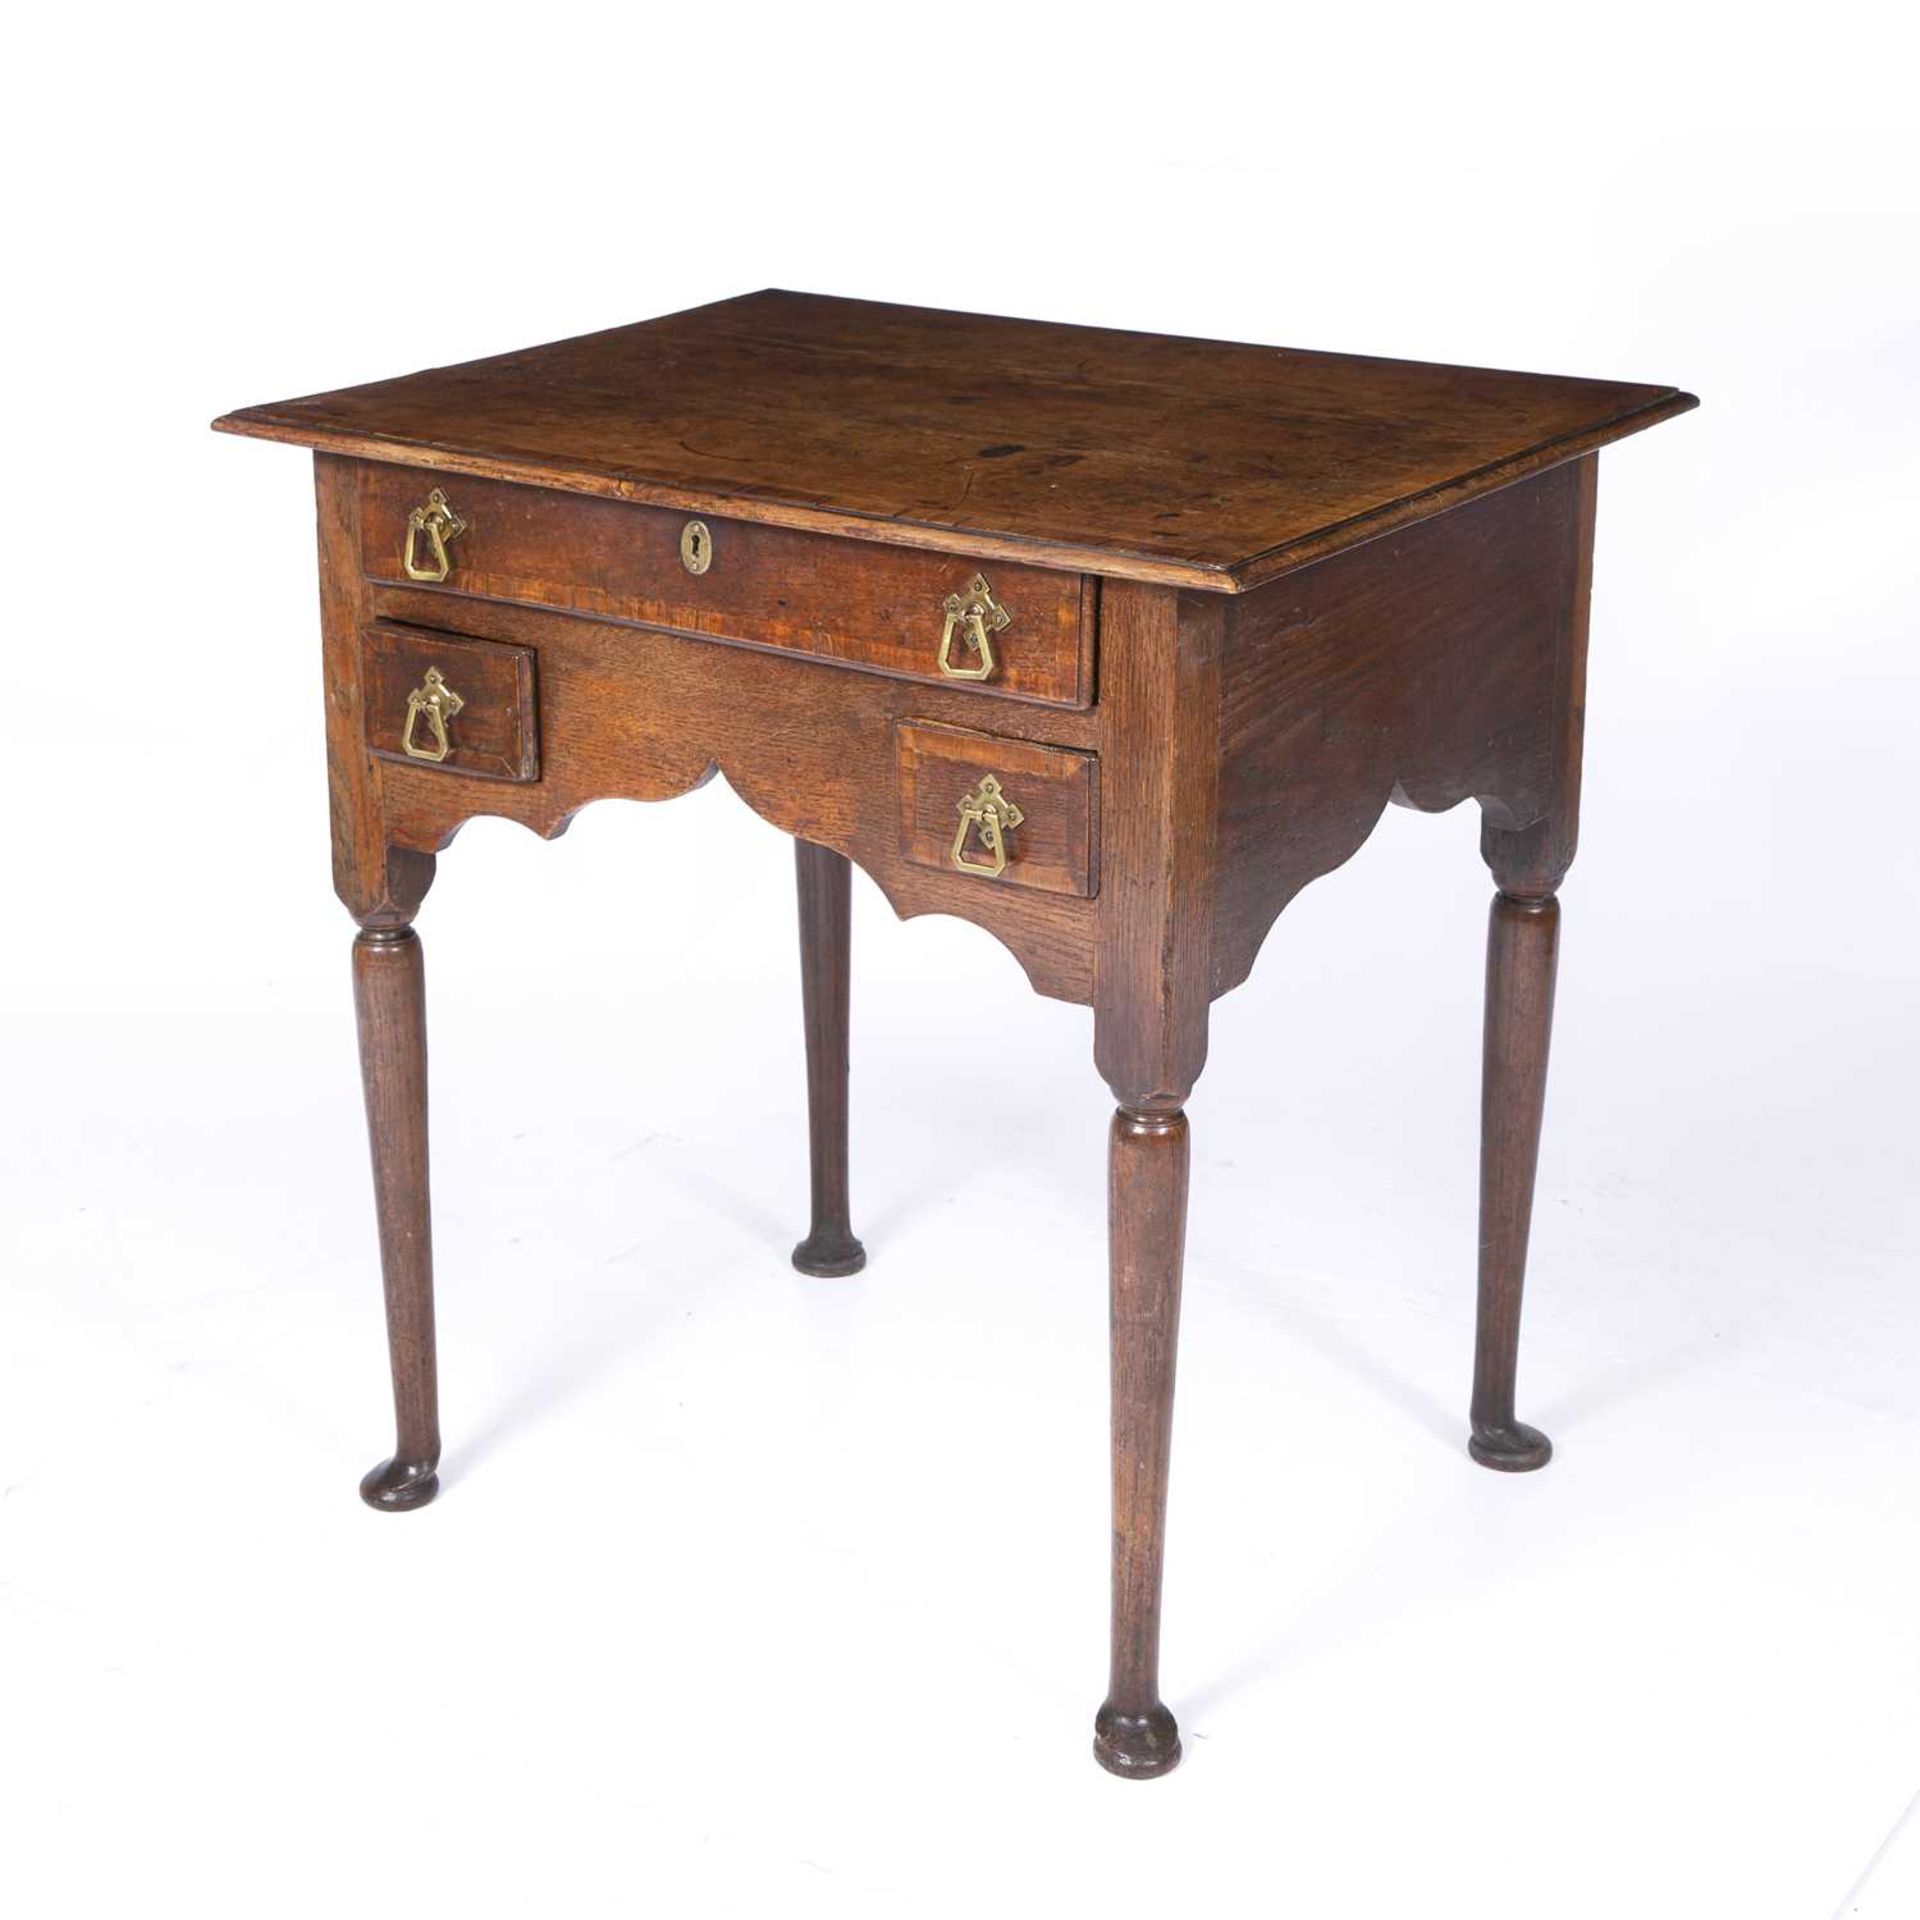 An 18th century oak low boy with three drawers and bras handles raised on turned legs and pad - Image 3 of 6